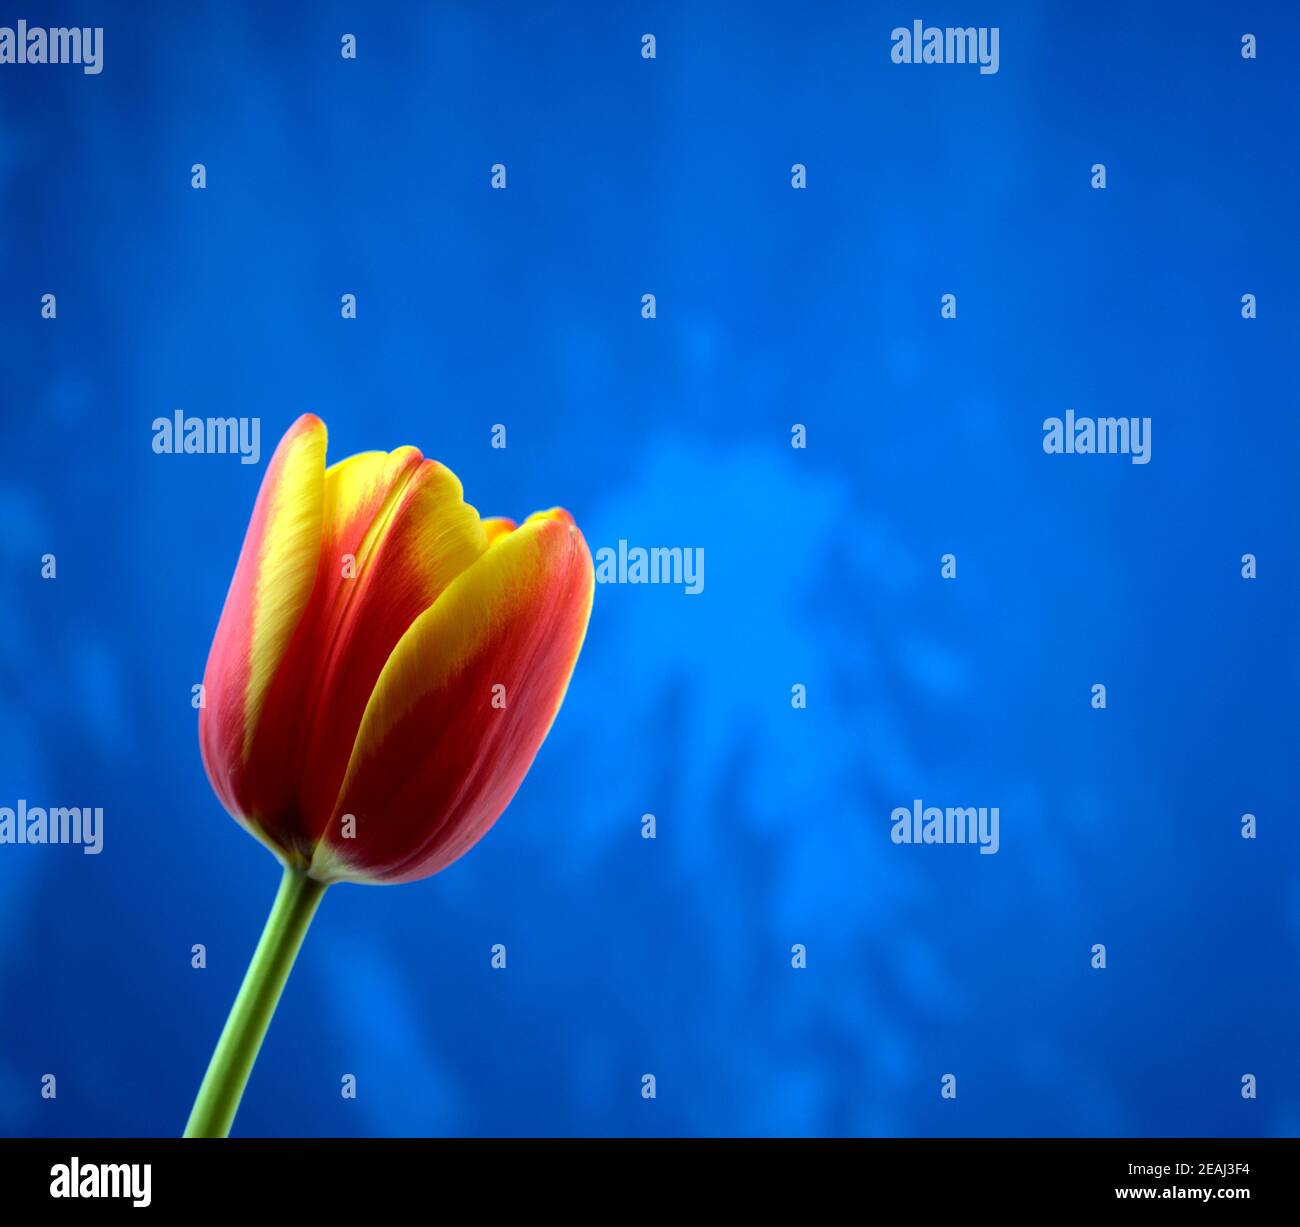 Fresh vivid red magenta grunge tulip flower with bright rough blue abstract acrylic handmade texture background. Head on, side view, off-center frame. Stock Photo